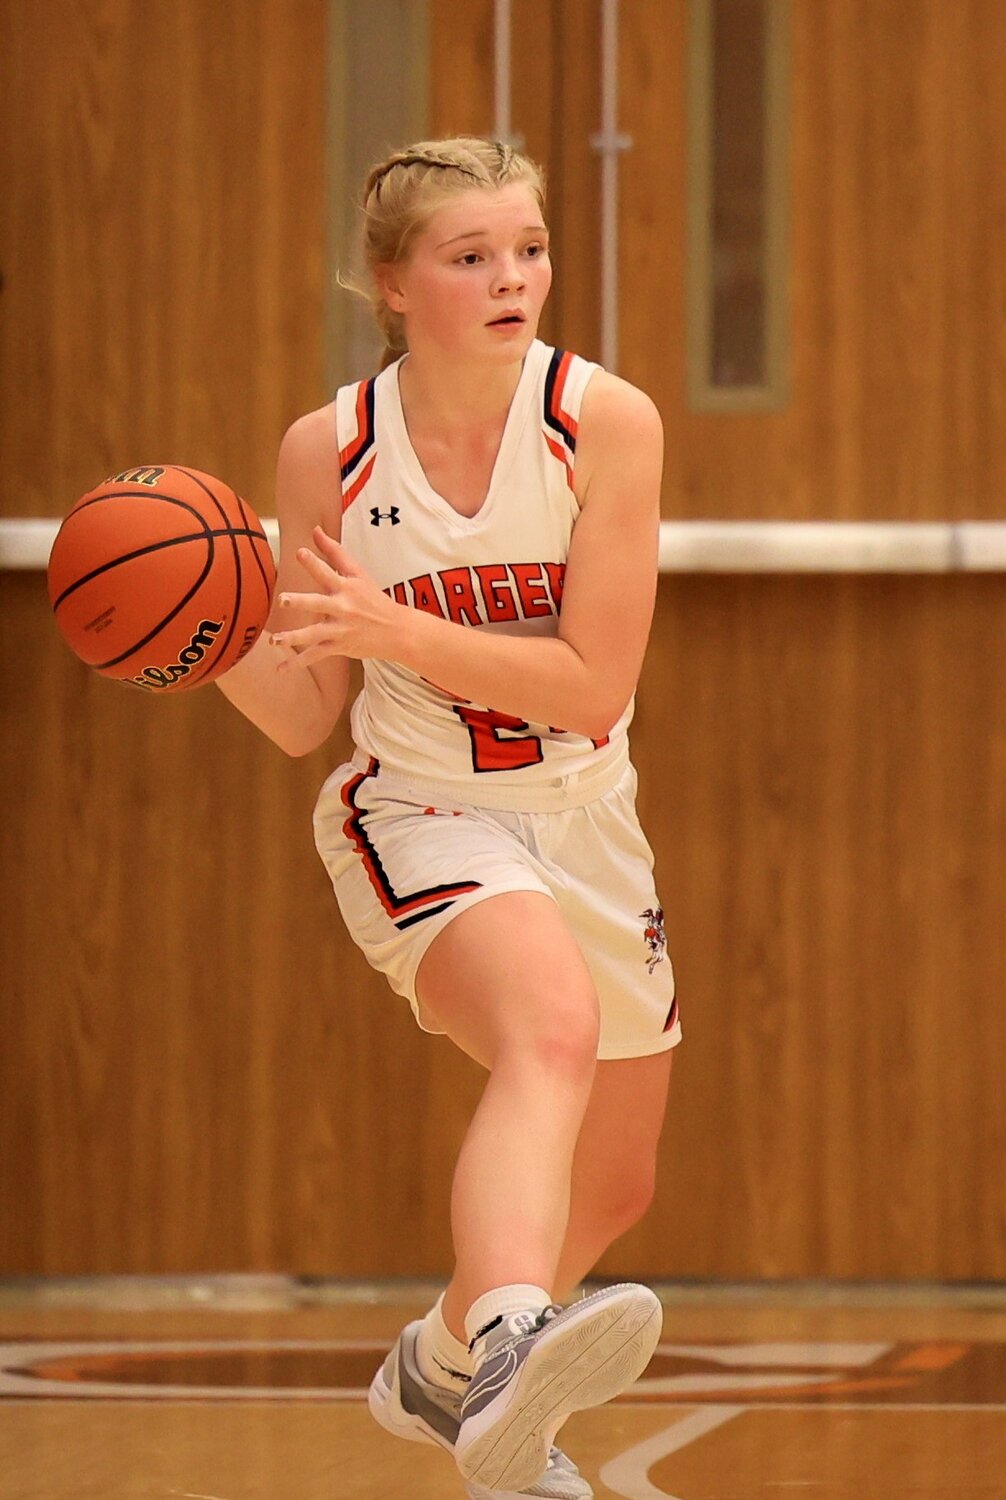 Freshman Caelyn Carpenter continued to play great defense and was asked to guard one of Rossville's top scorers.